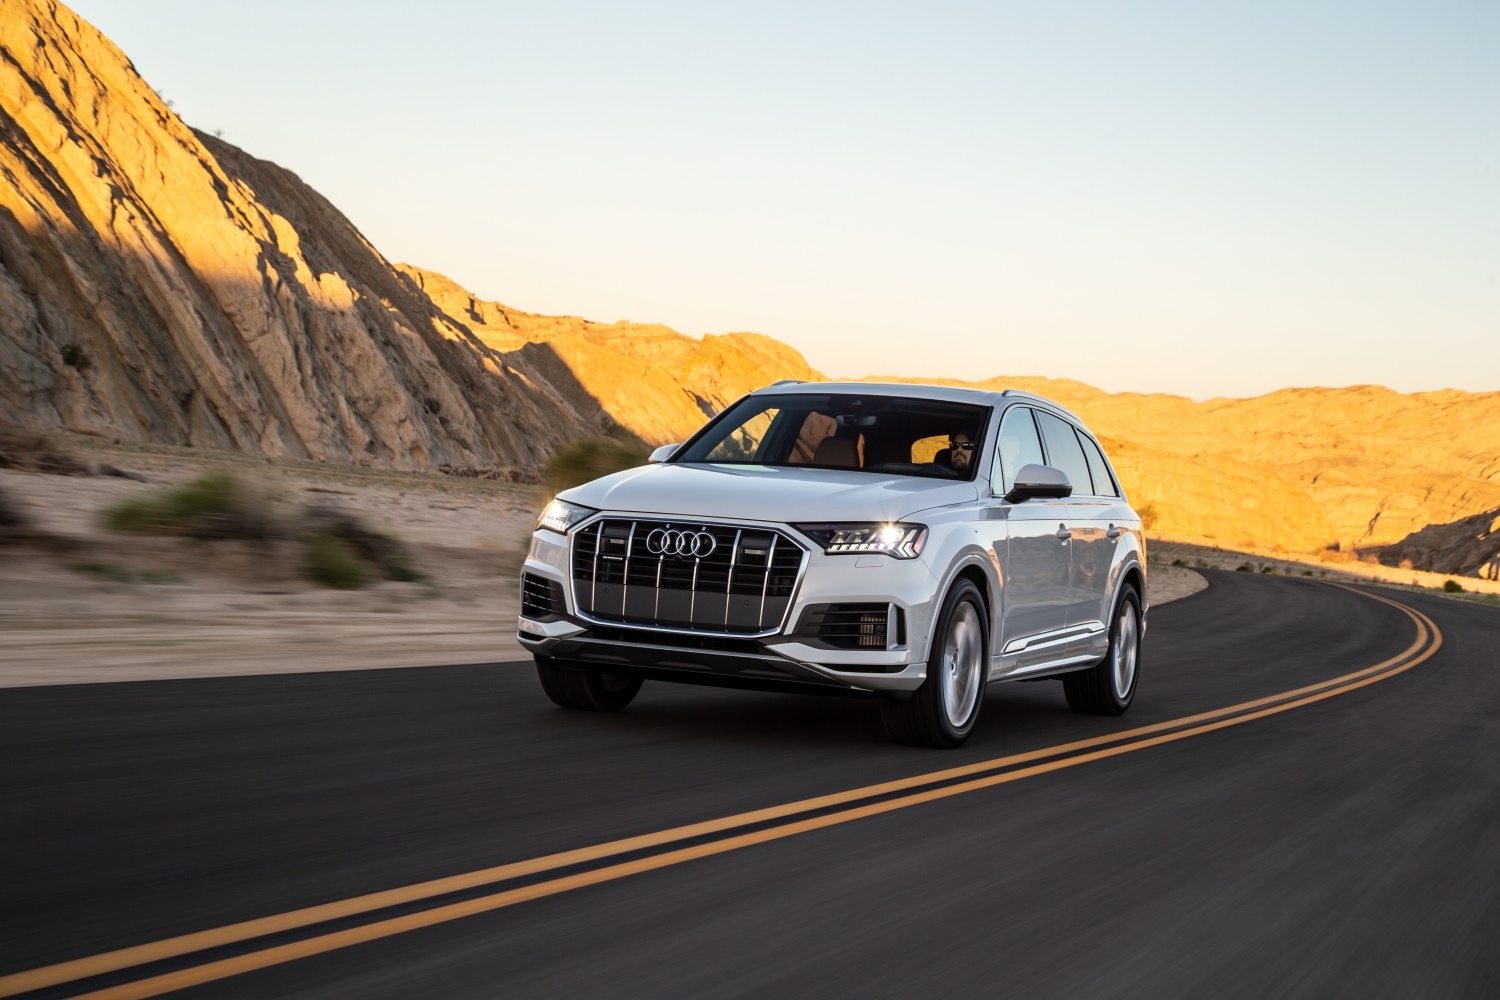 Midsize luxury SUVs With 3-rows like the Audi Q7